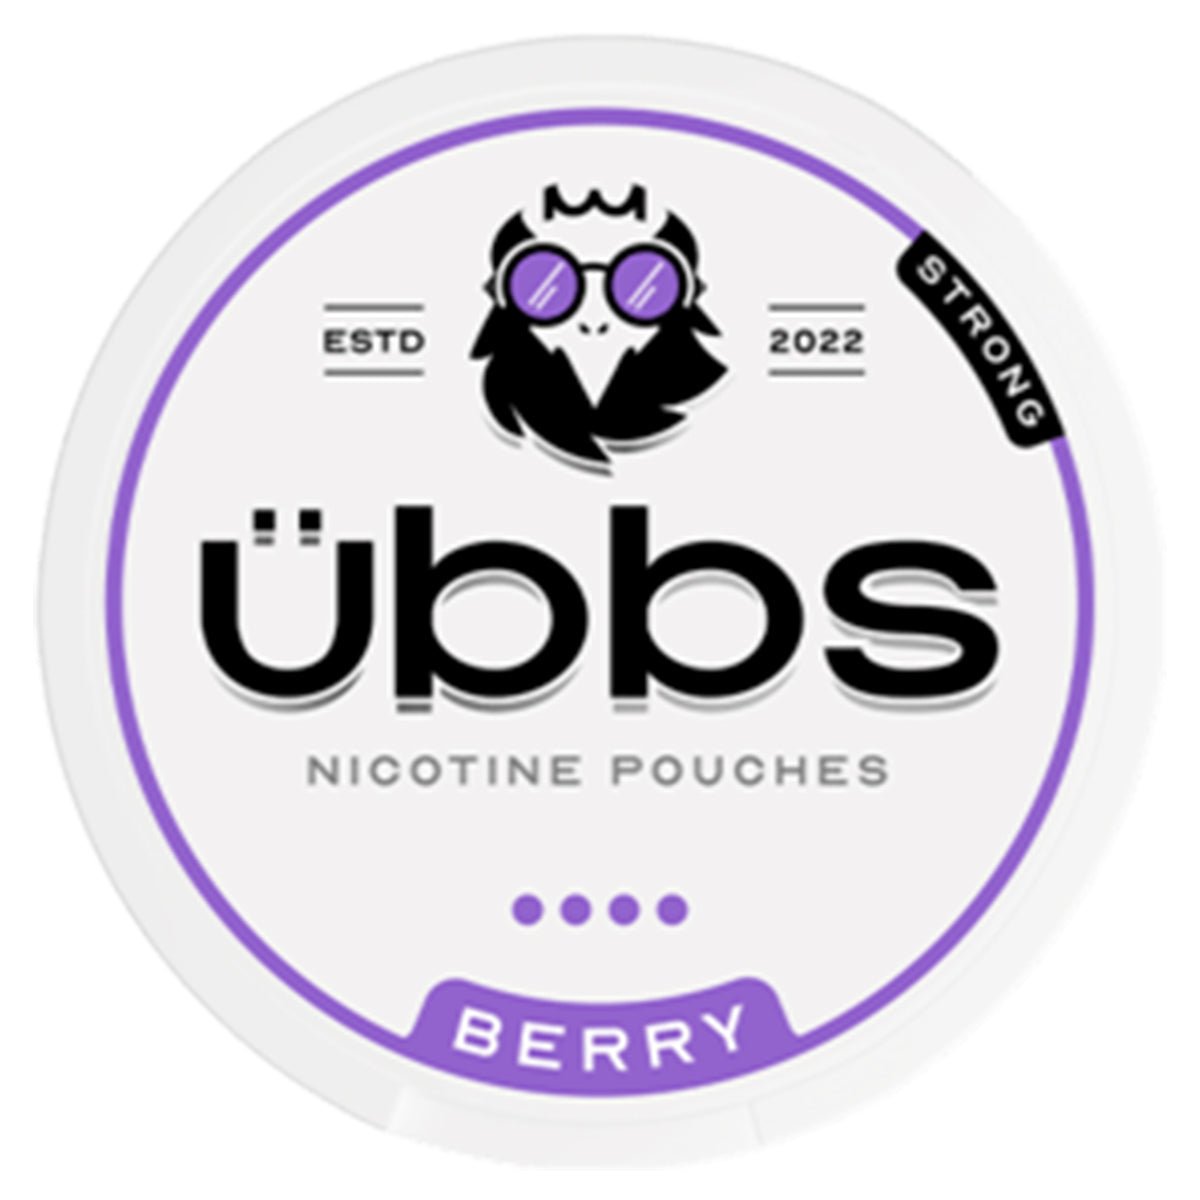 Berry Nicotine Pouches By Ubbs - Prime Vapes UK